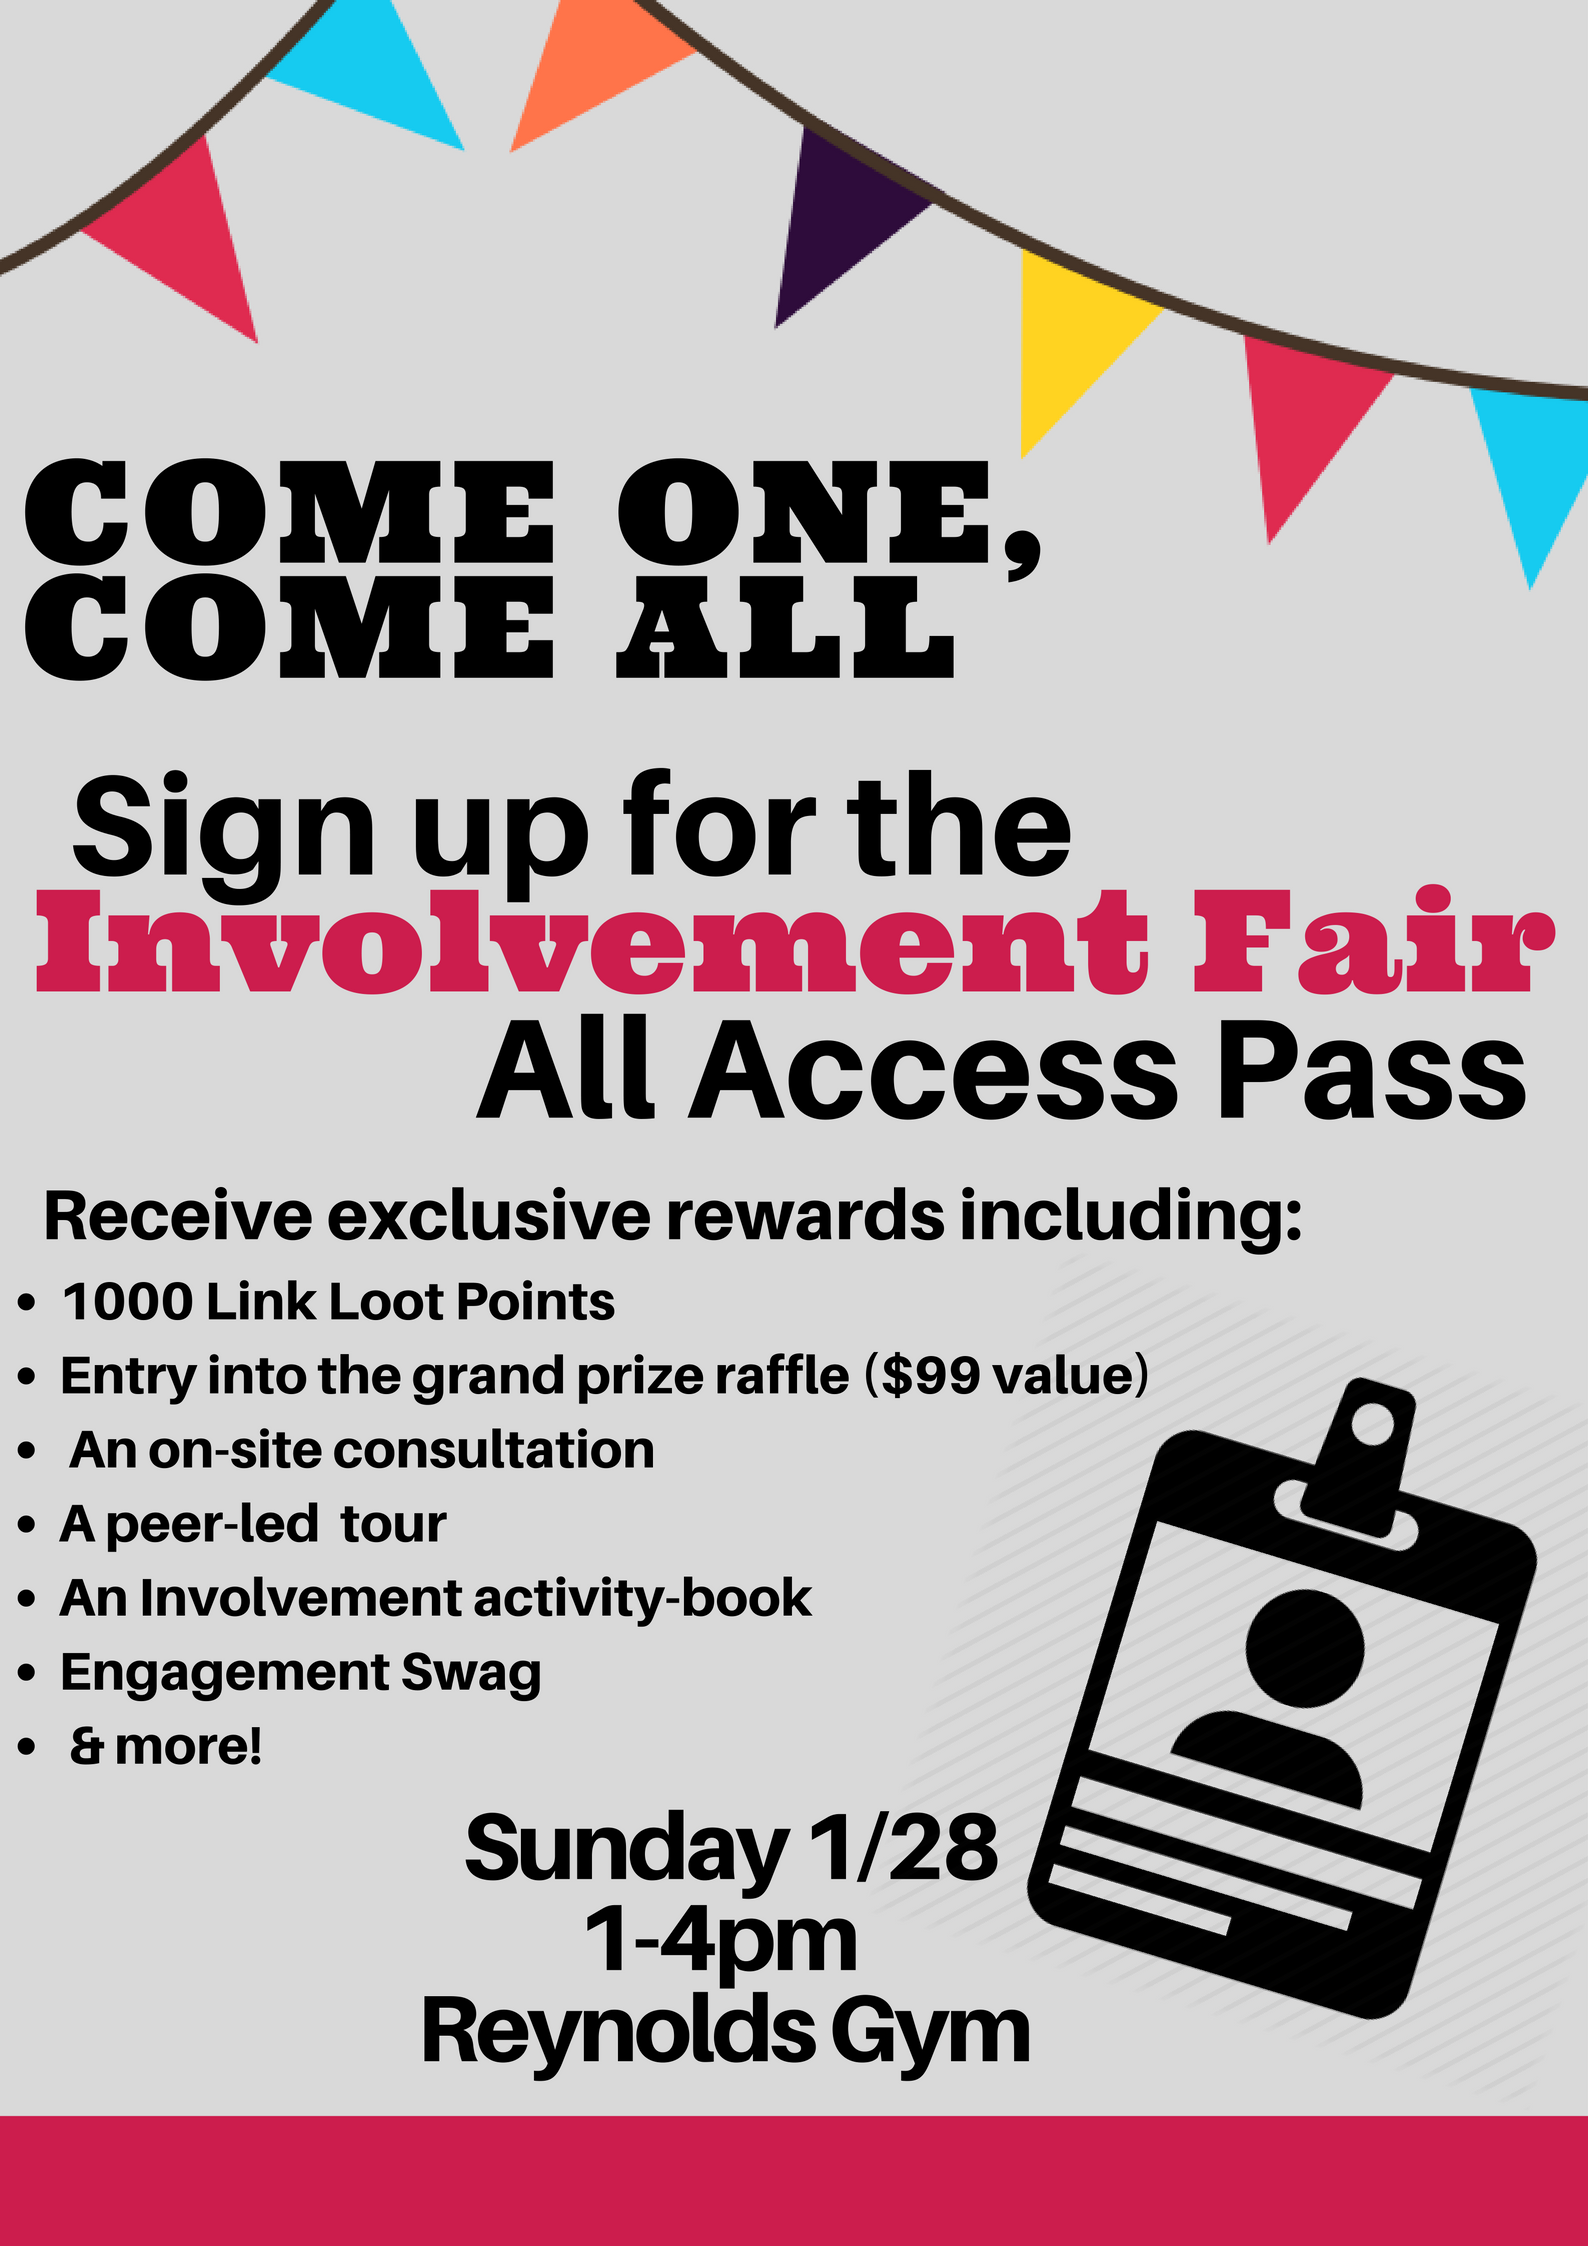 Student Involvement Fair 2018 All Access Pass is a great way to find your place on campus!